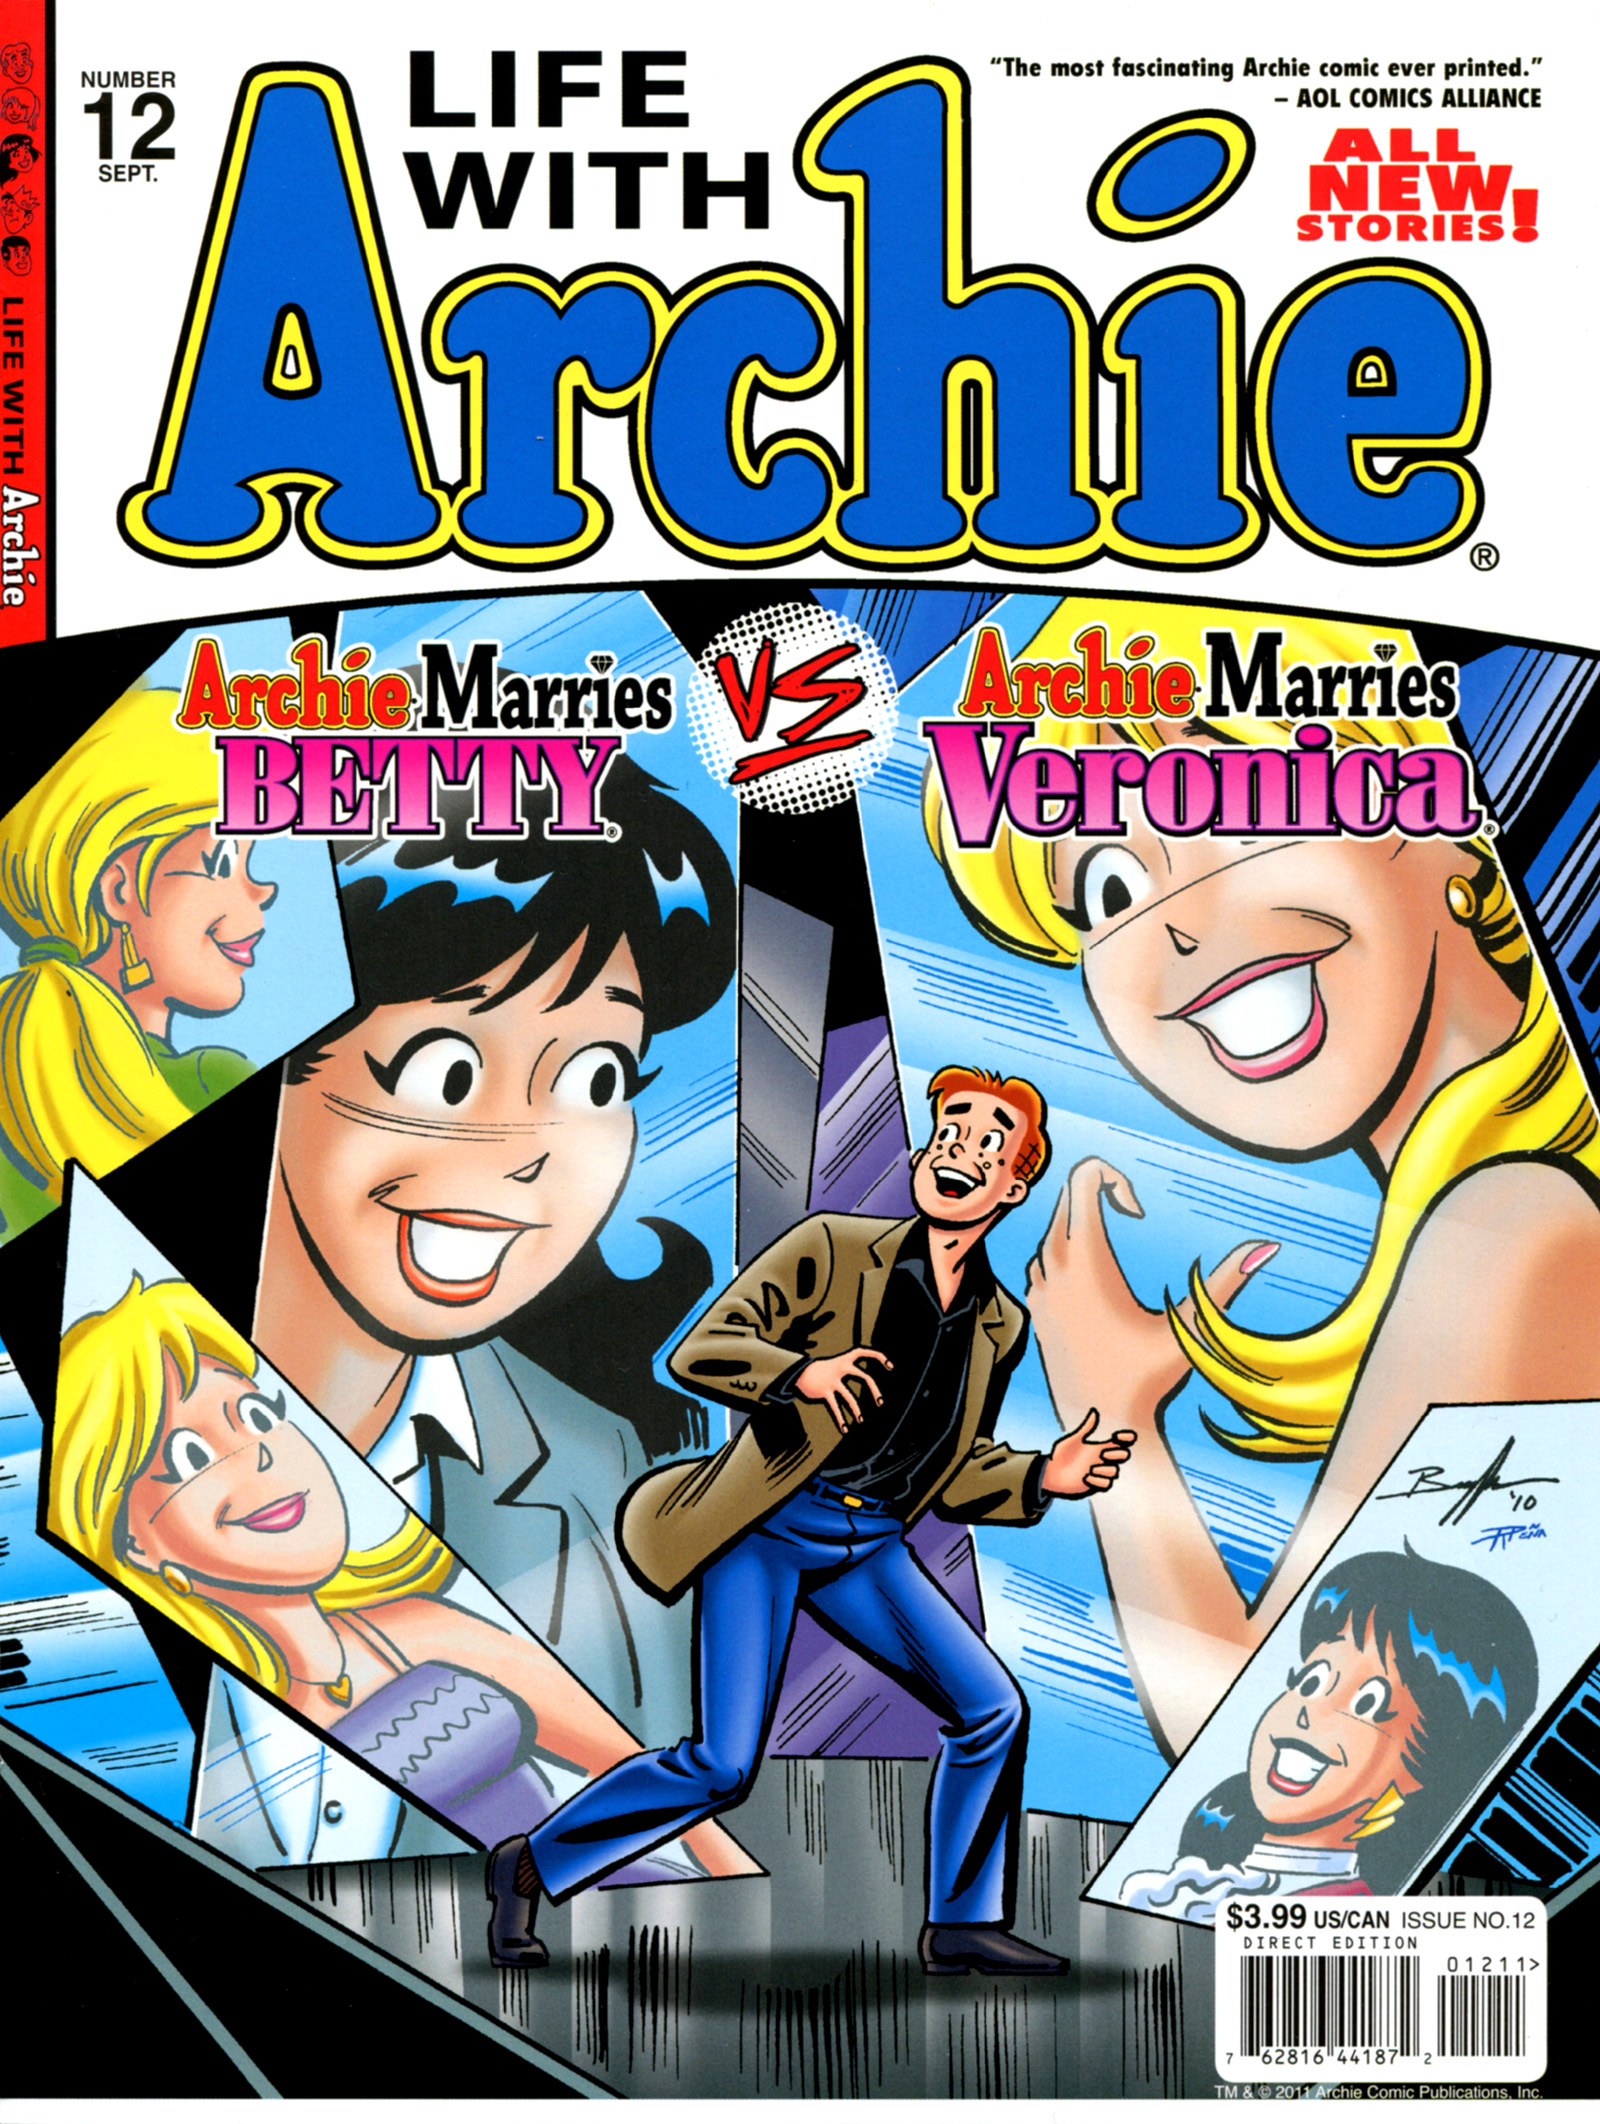 Issue 12. Life with Archie.